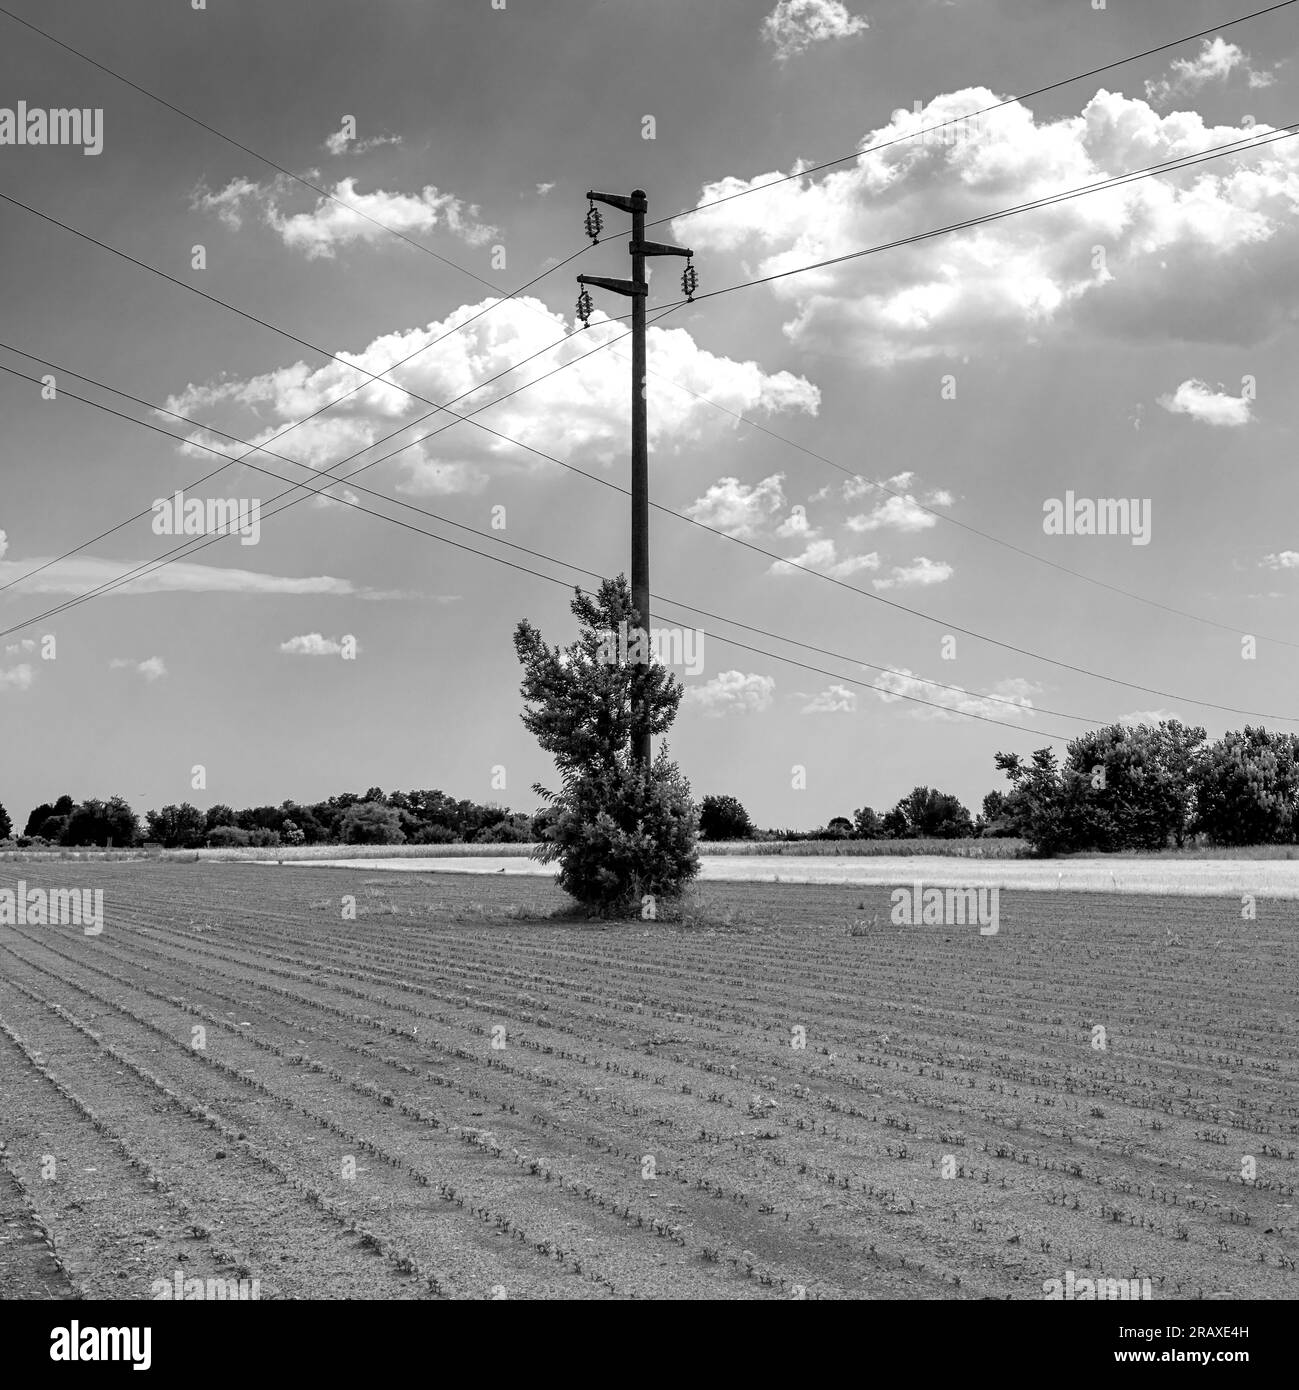 black and white image of an electricity pylon in the middle of a cultivated field Stock Photo